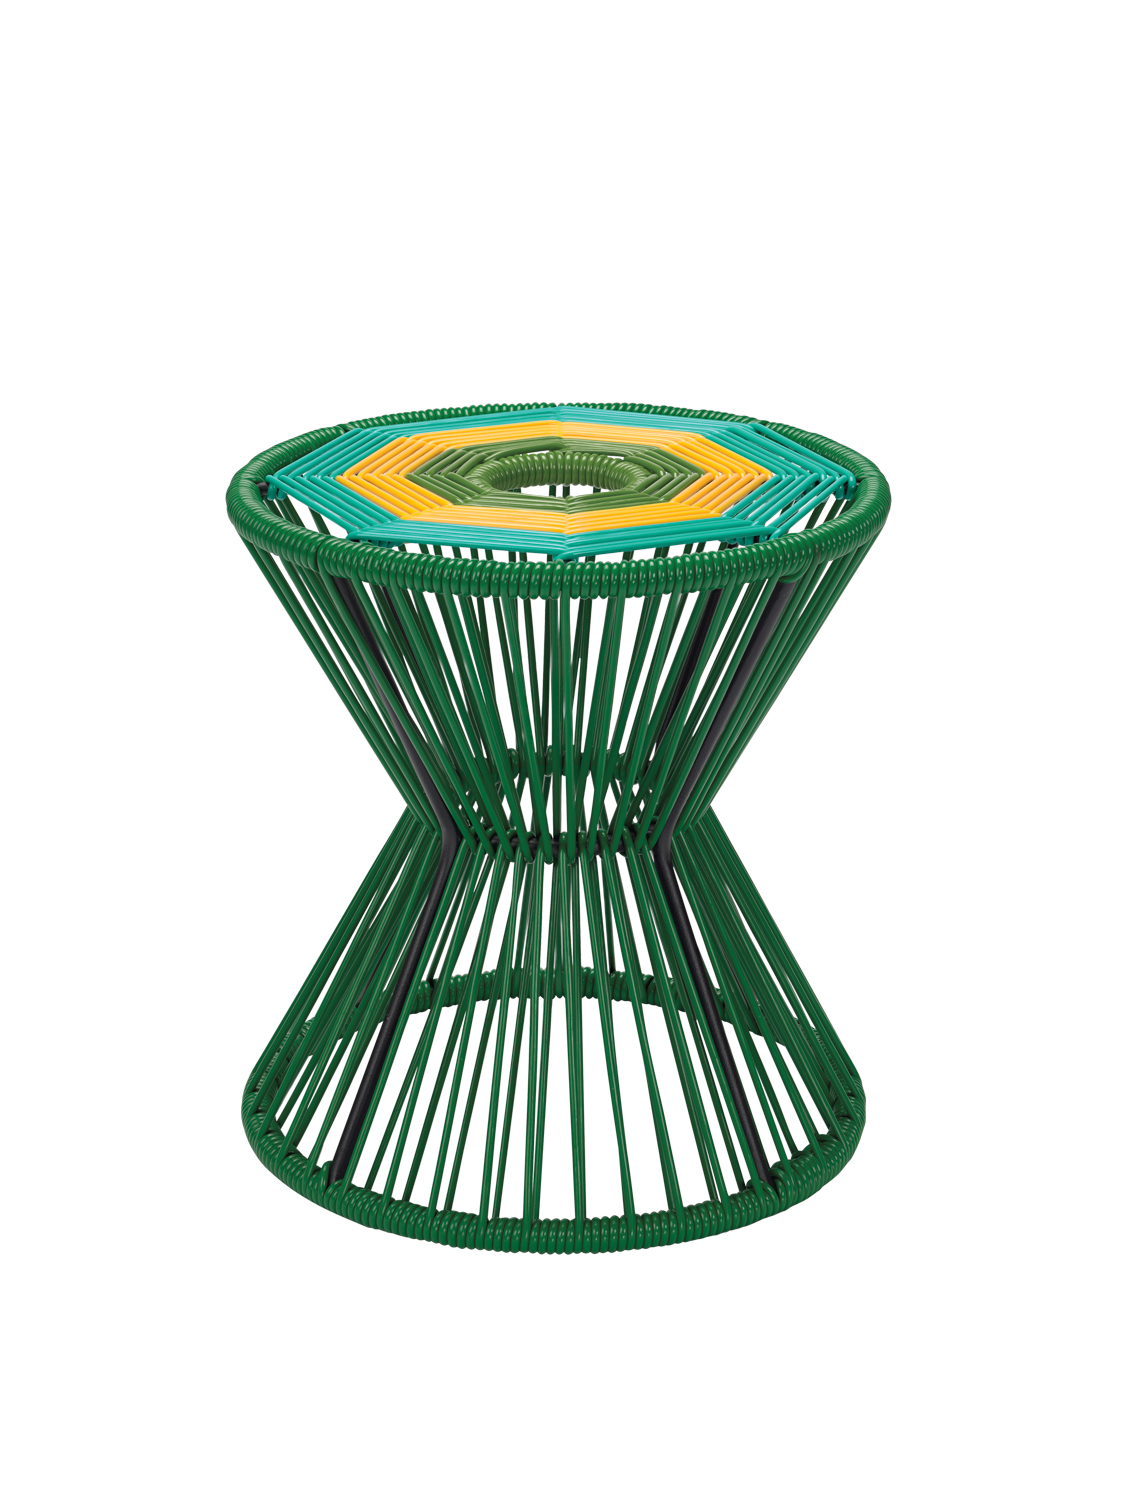 a green iron stool/table